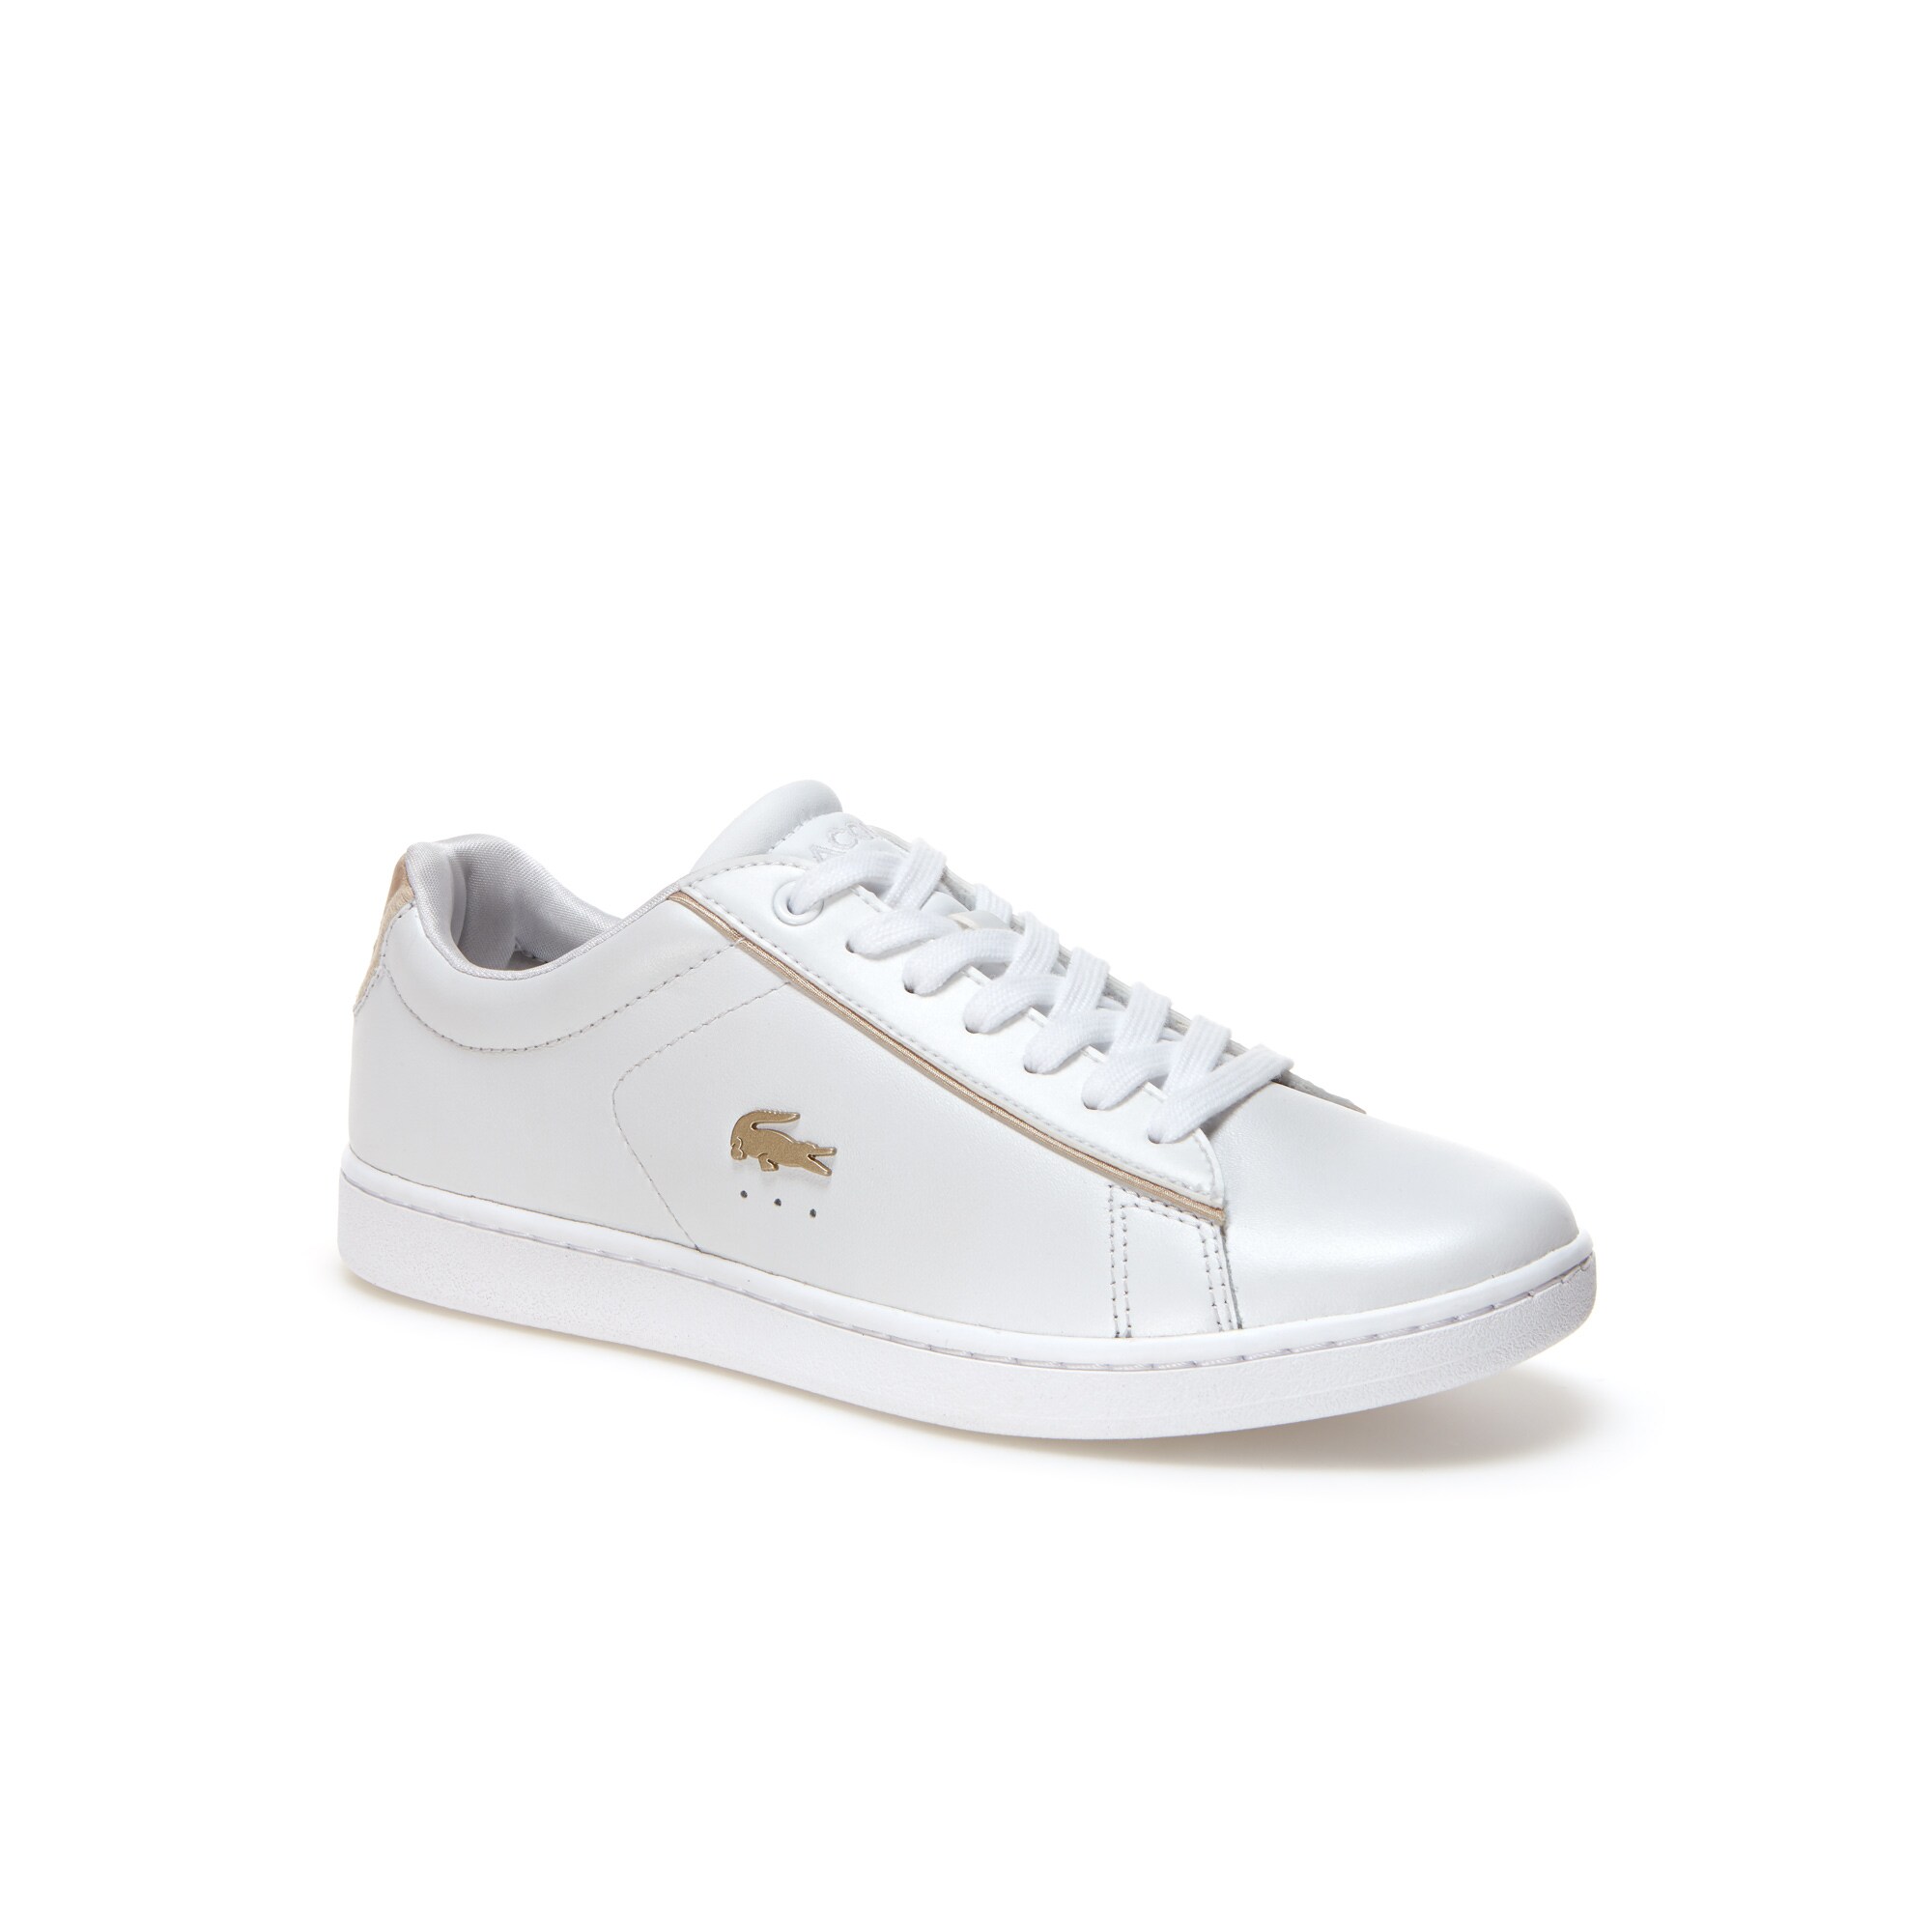 Lacoste Women's leather sneakers Carnaby Evo 118 6 Spw 735SPW0013-216 |  Lacoste